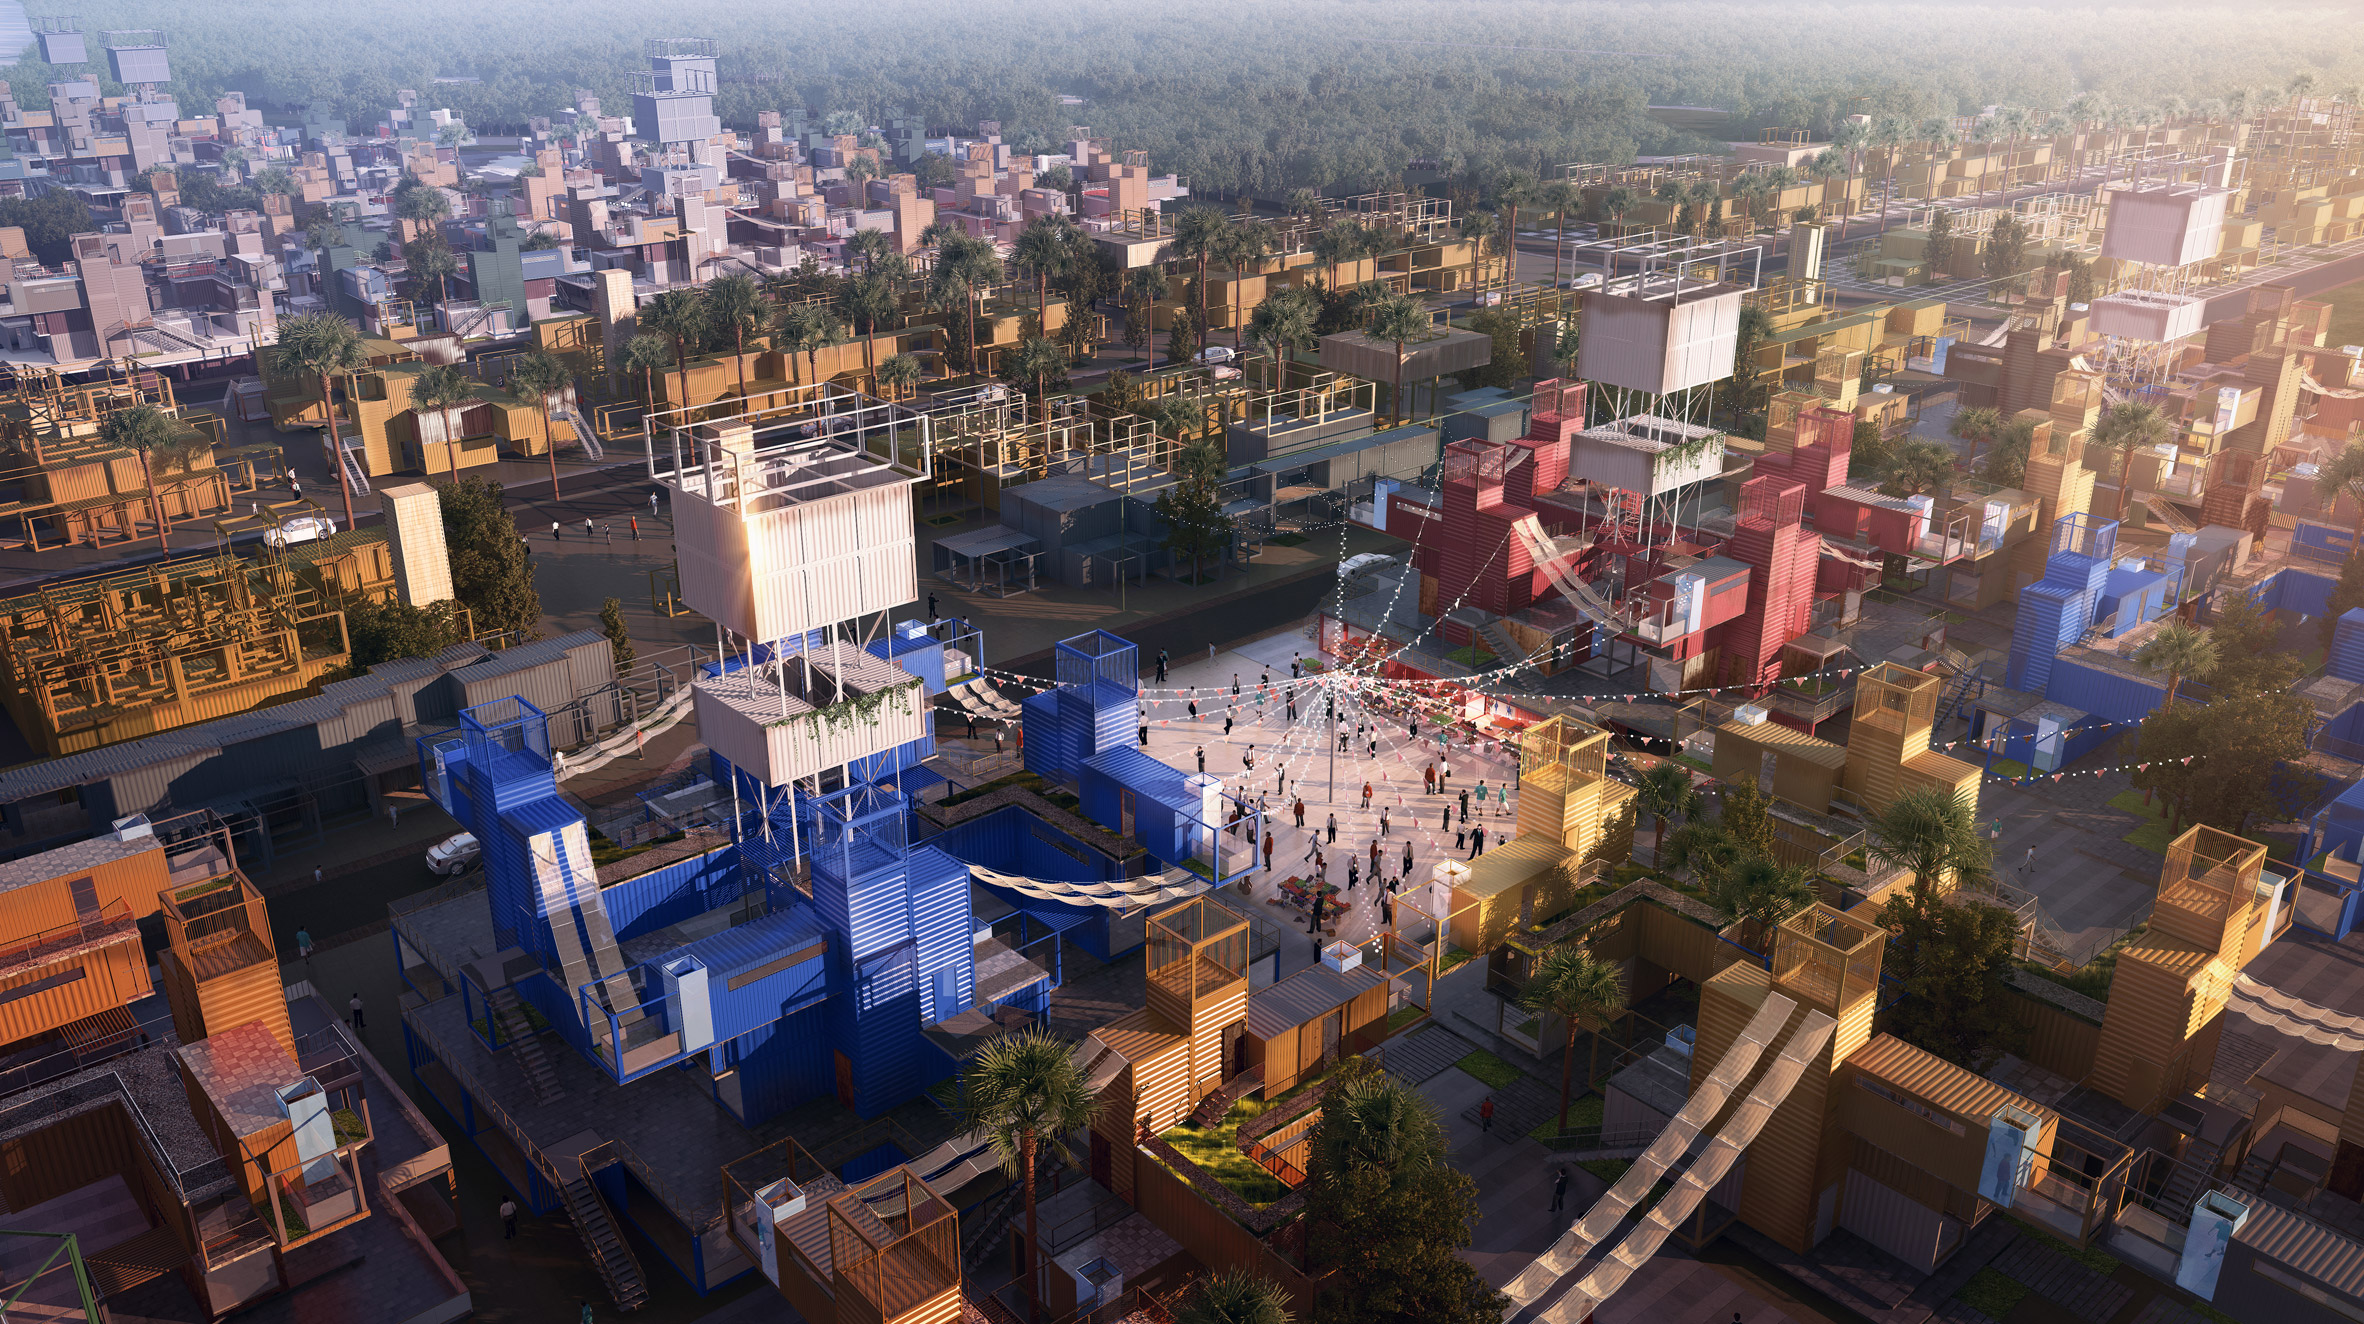 Sheltainer offers shipping containers as alternative housing for Cairo's cemetery-dwellers